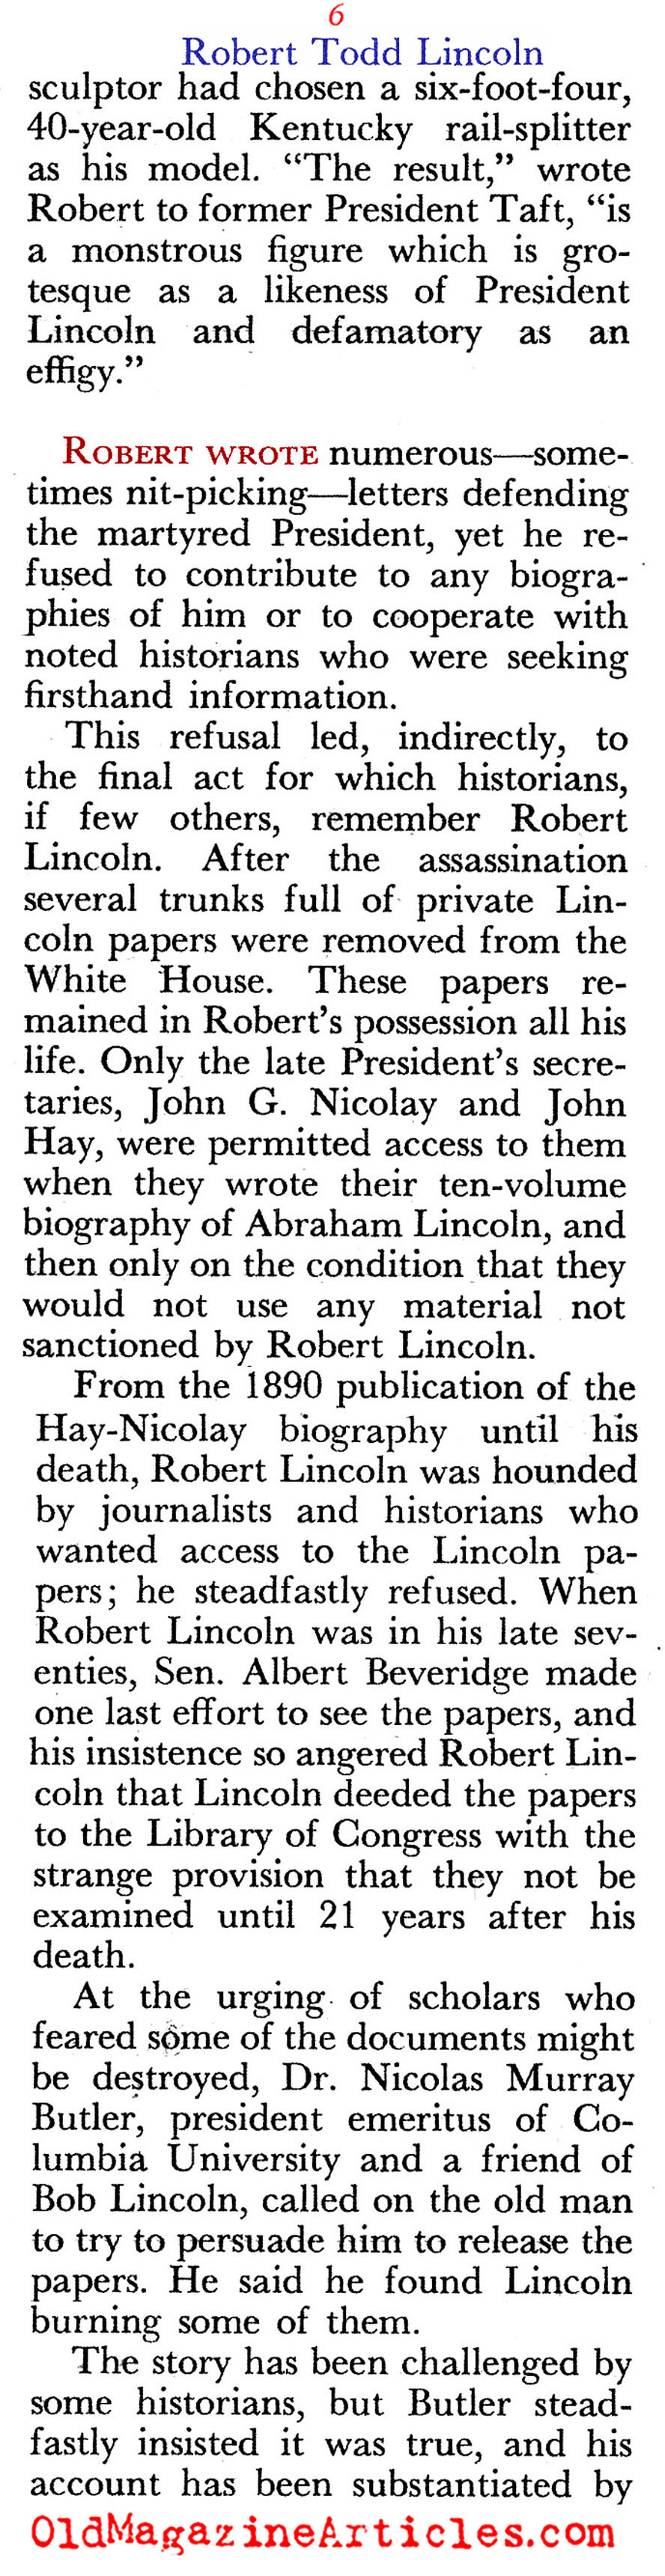 The Lincoln Blood Line Ends (Pageant Magazine, 1963)